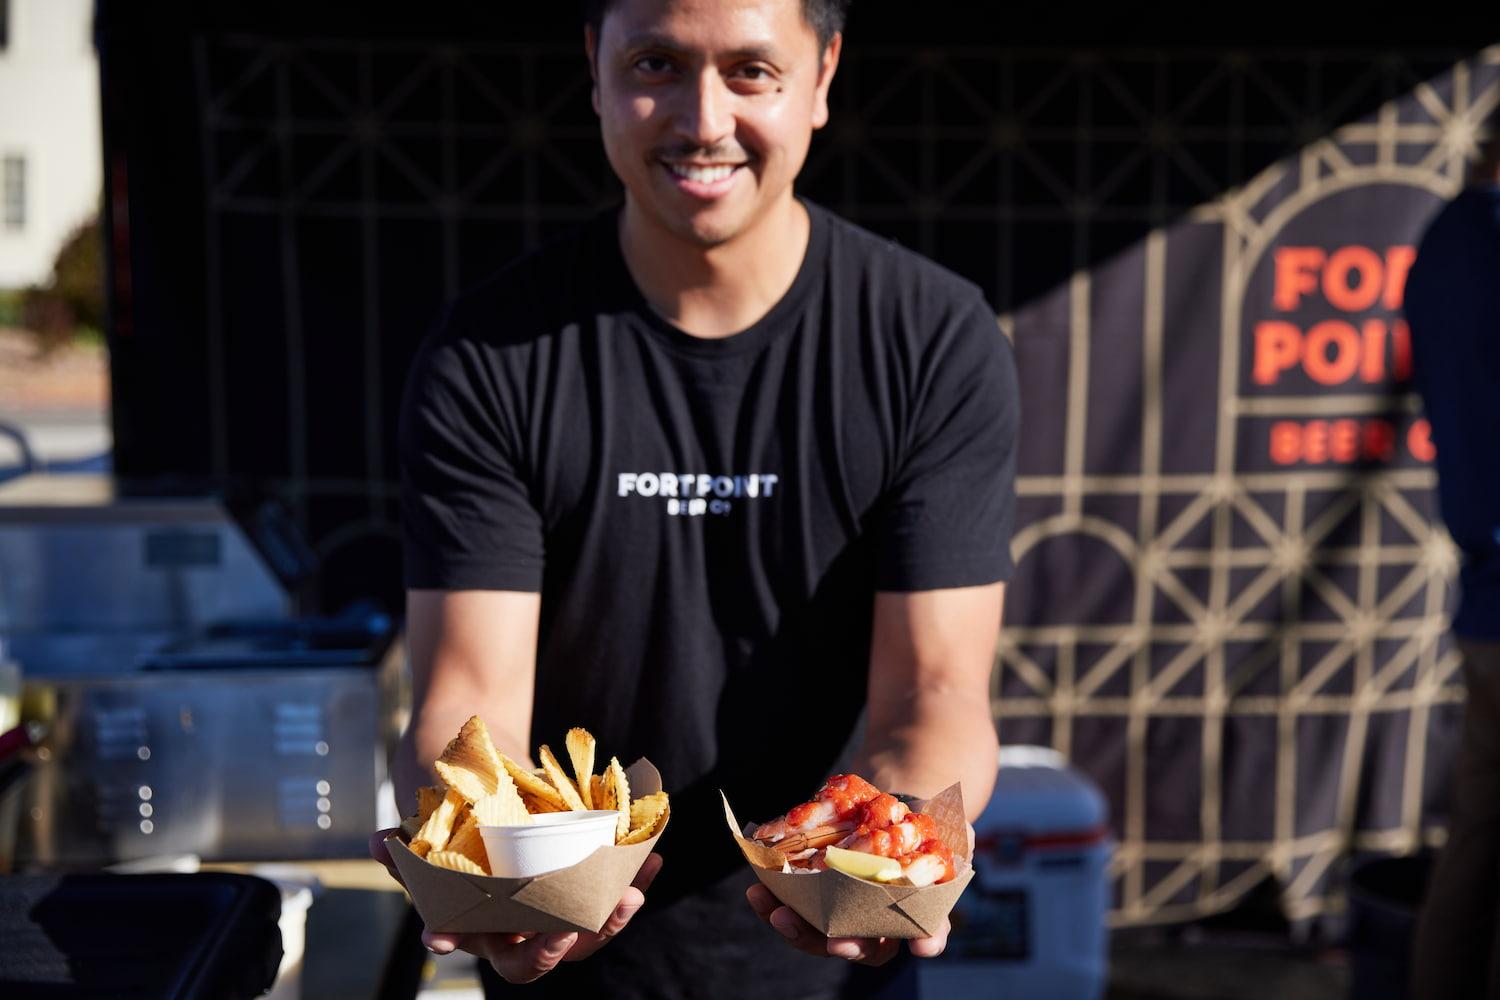 A male food vendor holds two plates of food at Presidio Pop Up. Photo by Rachel Styer.